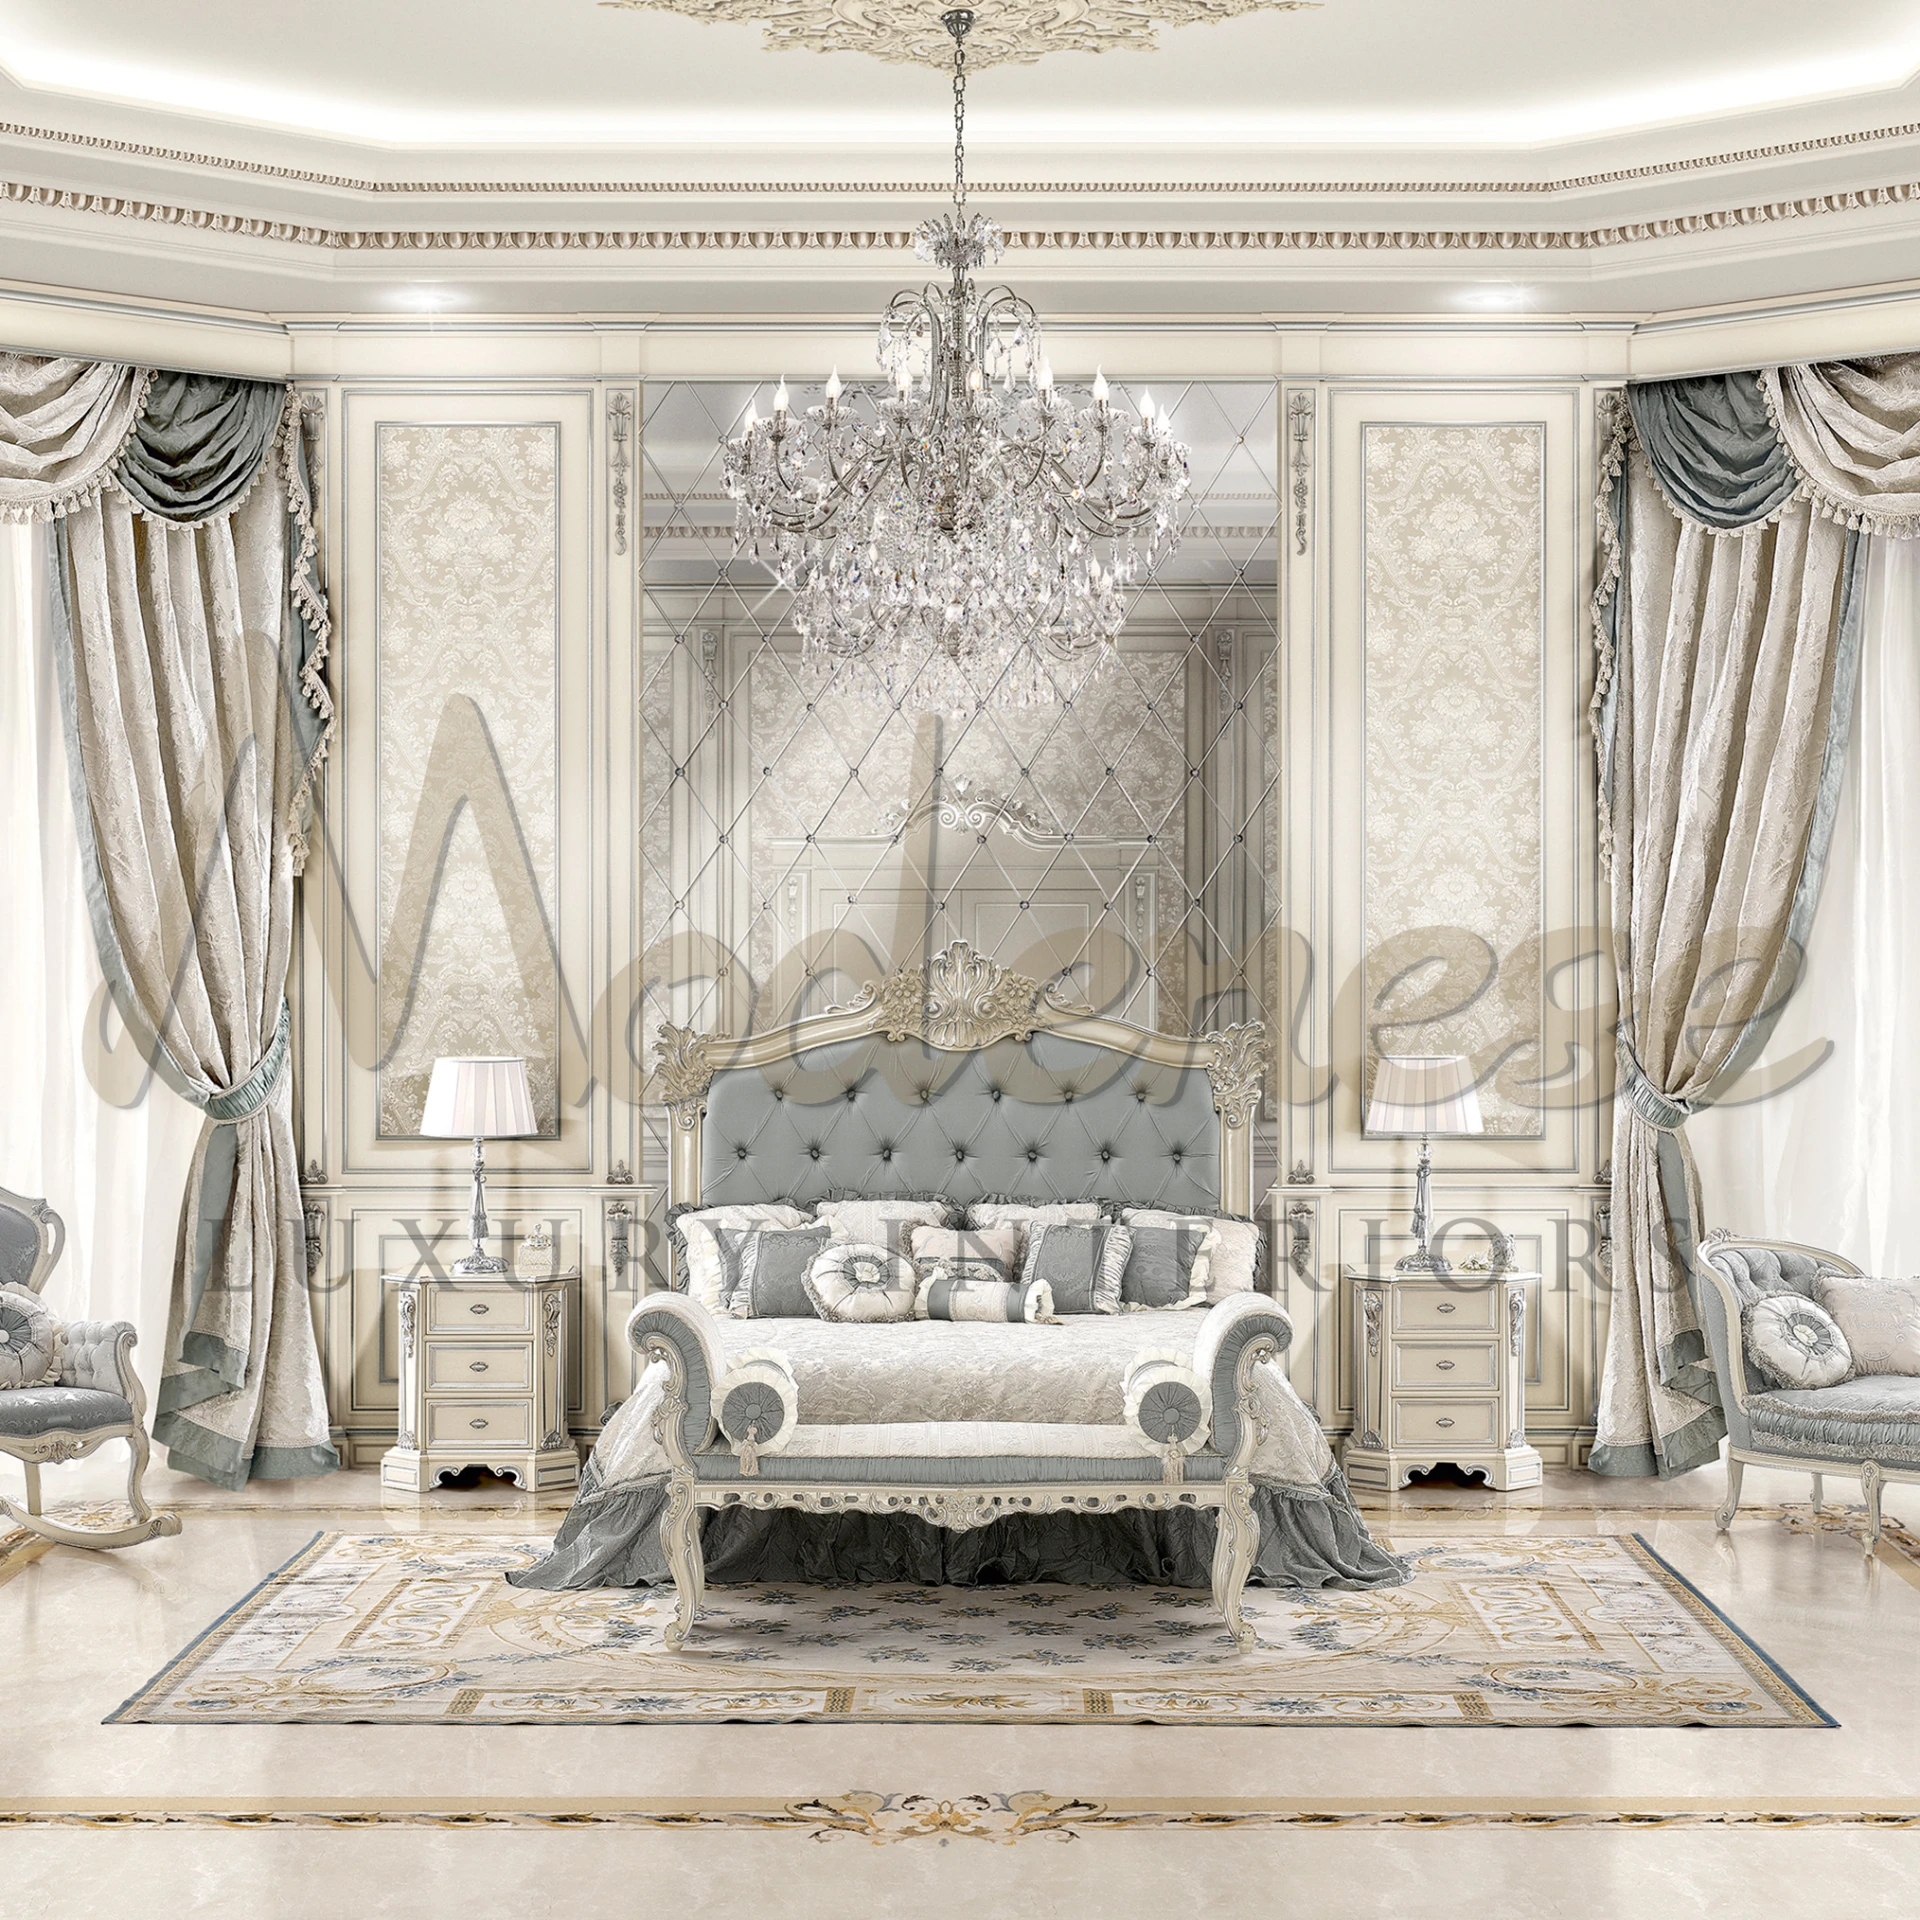 Luxurious bedroom with a top notched bed, elegant drapes, and a Italian classic crystal chandelier.